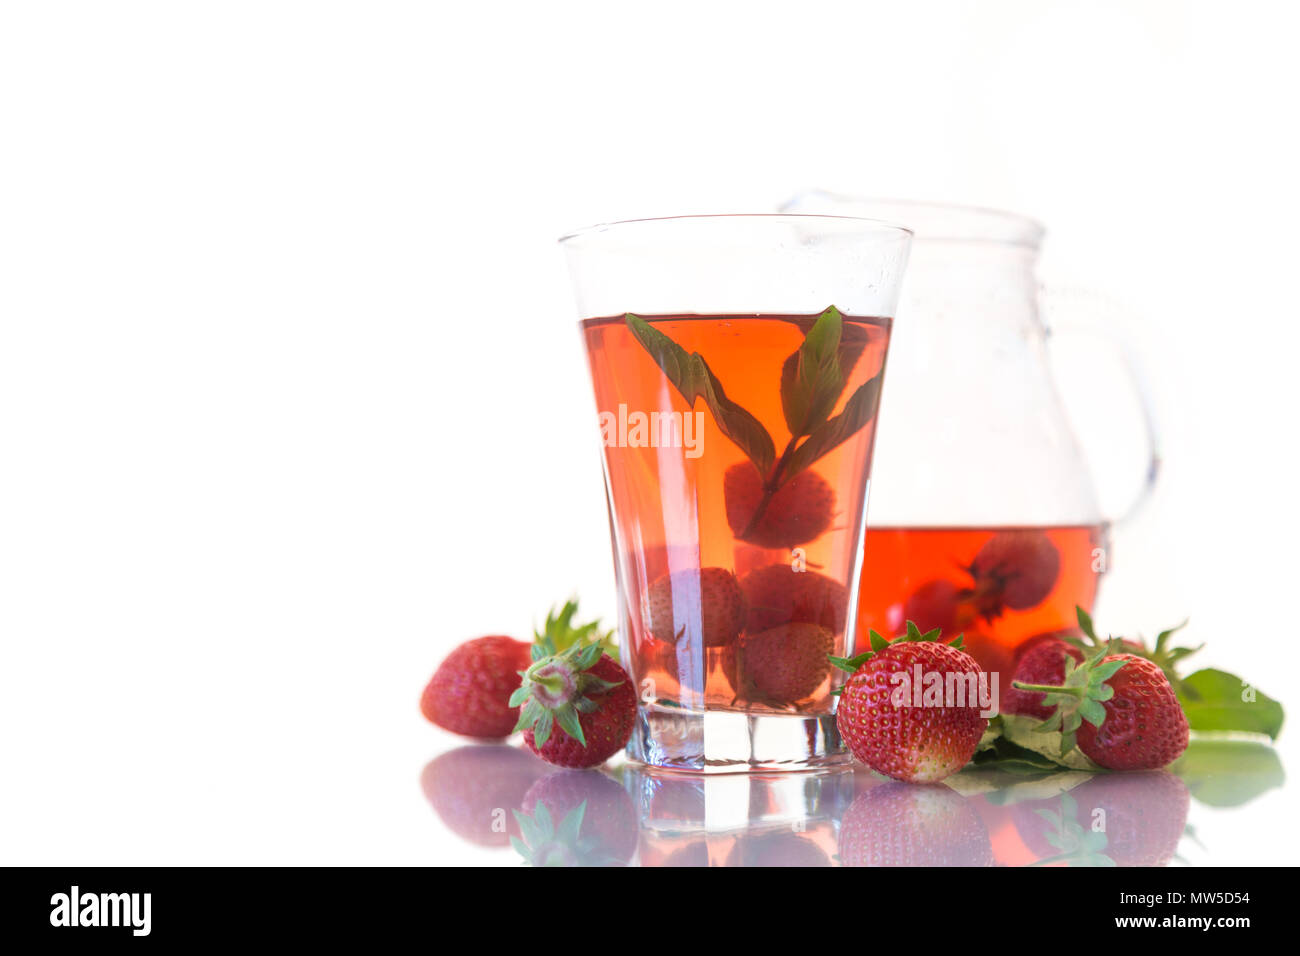 Sweet compote of ripe red strawberries in a glass decanter on a white background Stock Photo